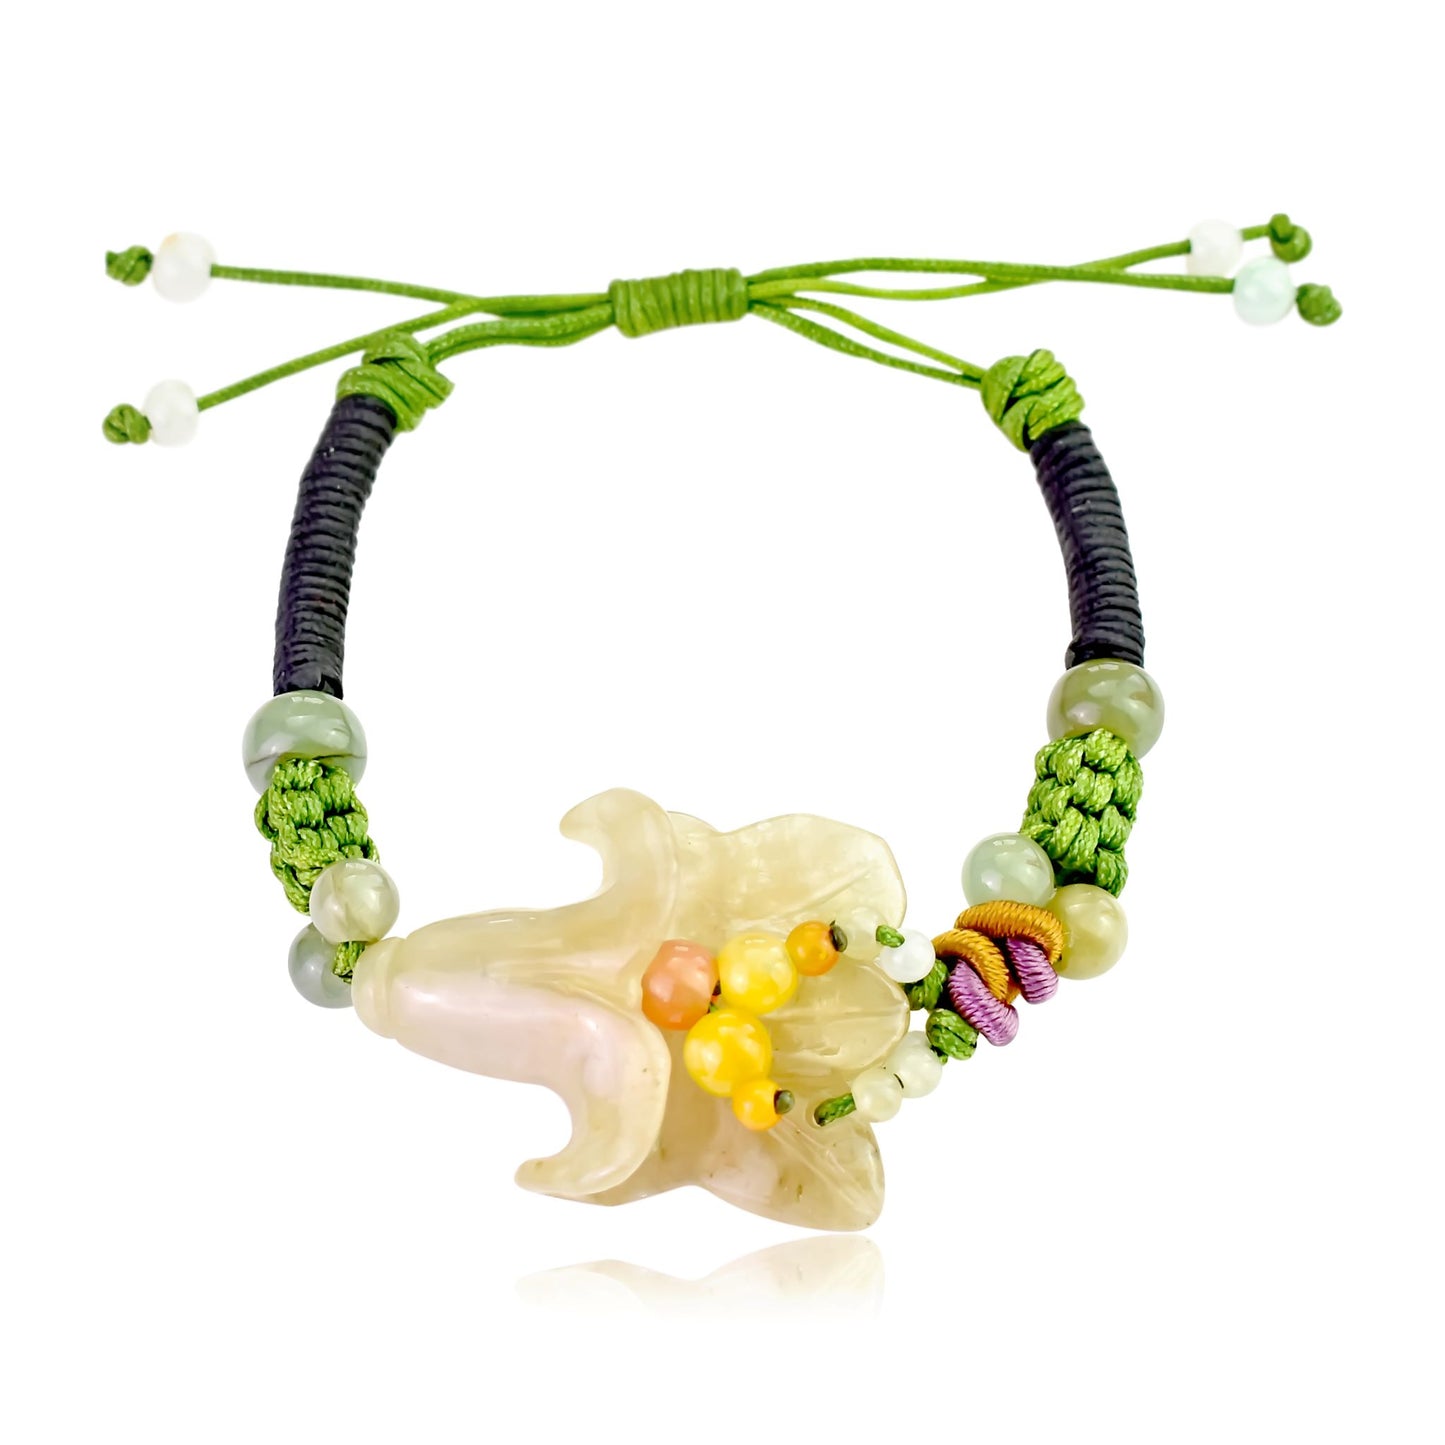 Stand Out with a Colorful Bellflower Handmade Jade Bracelet with Black Cord